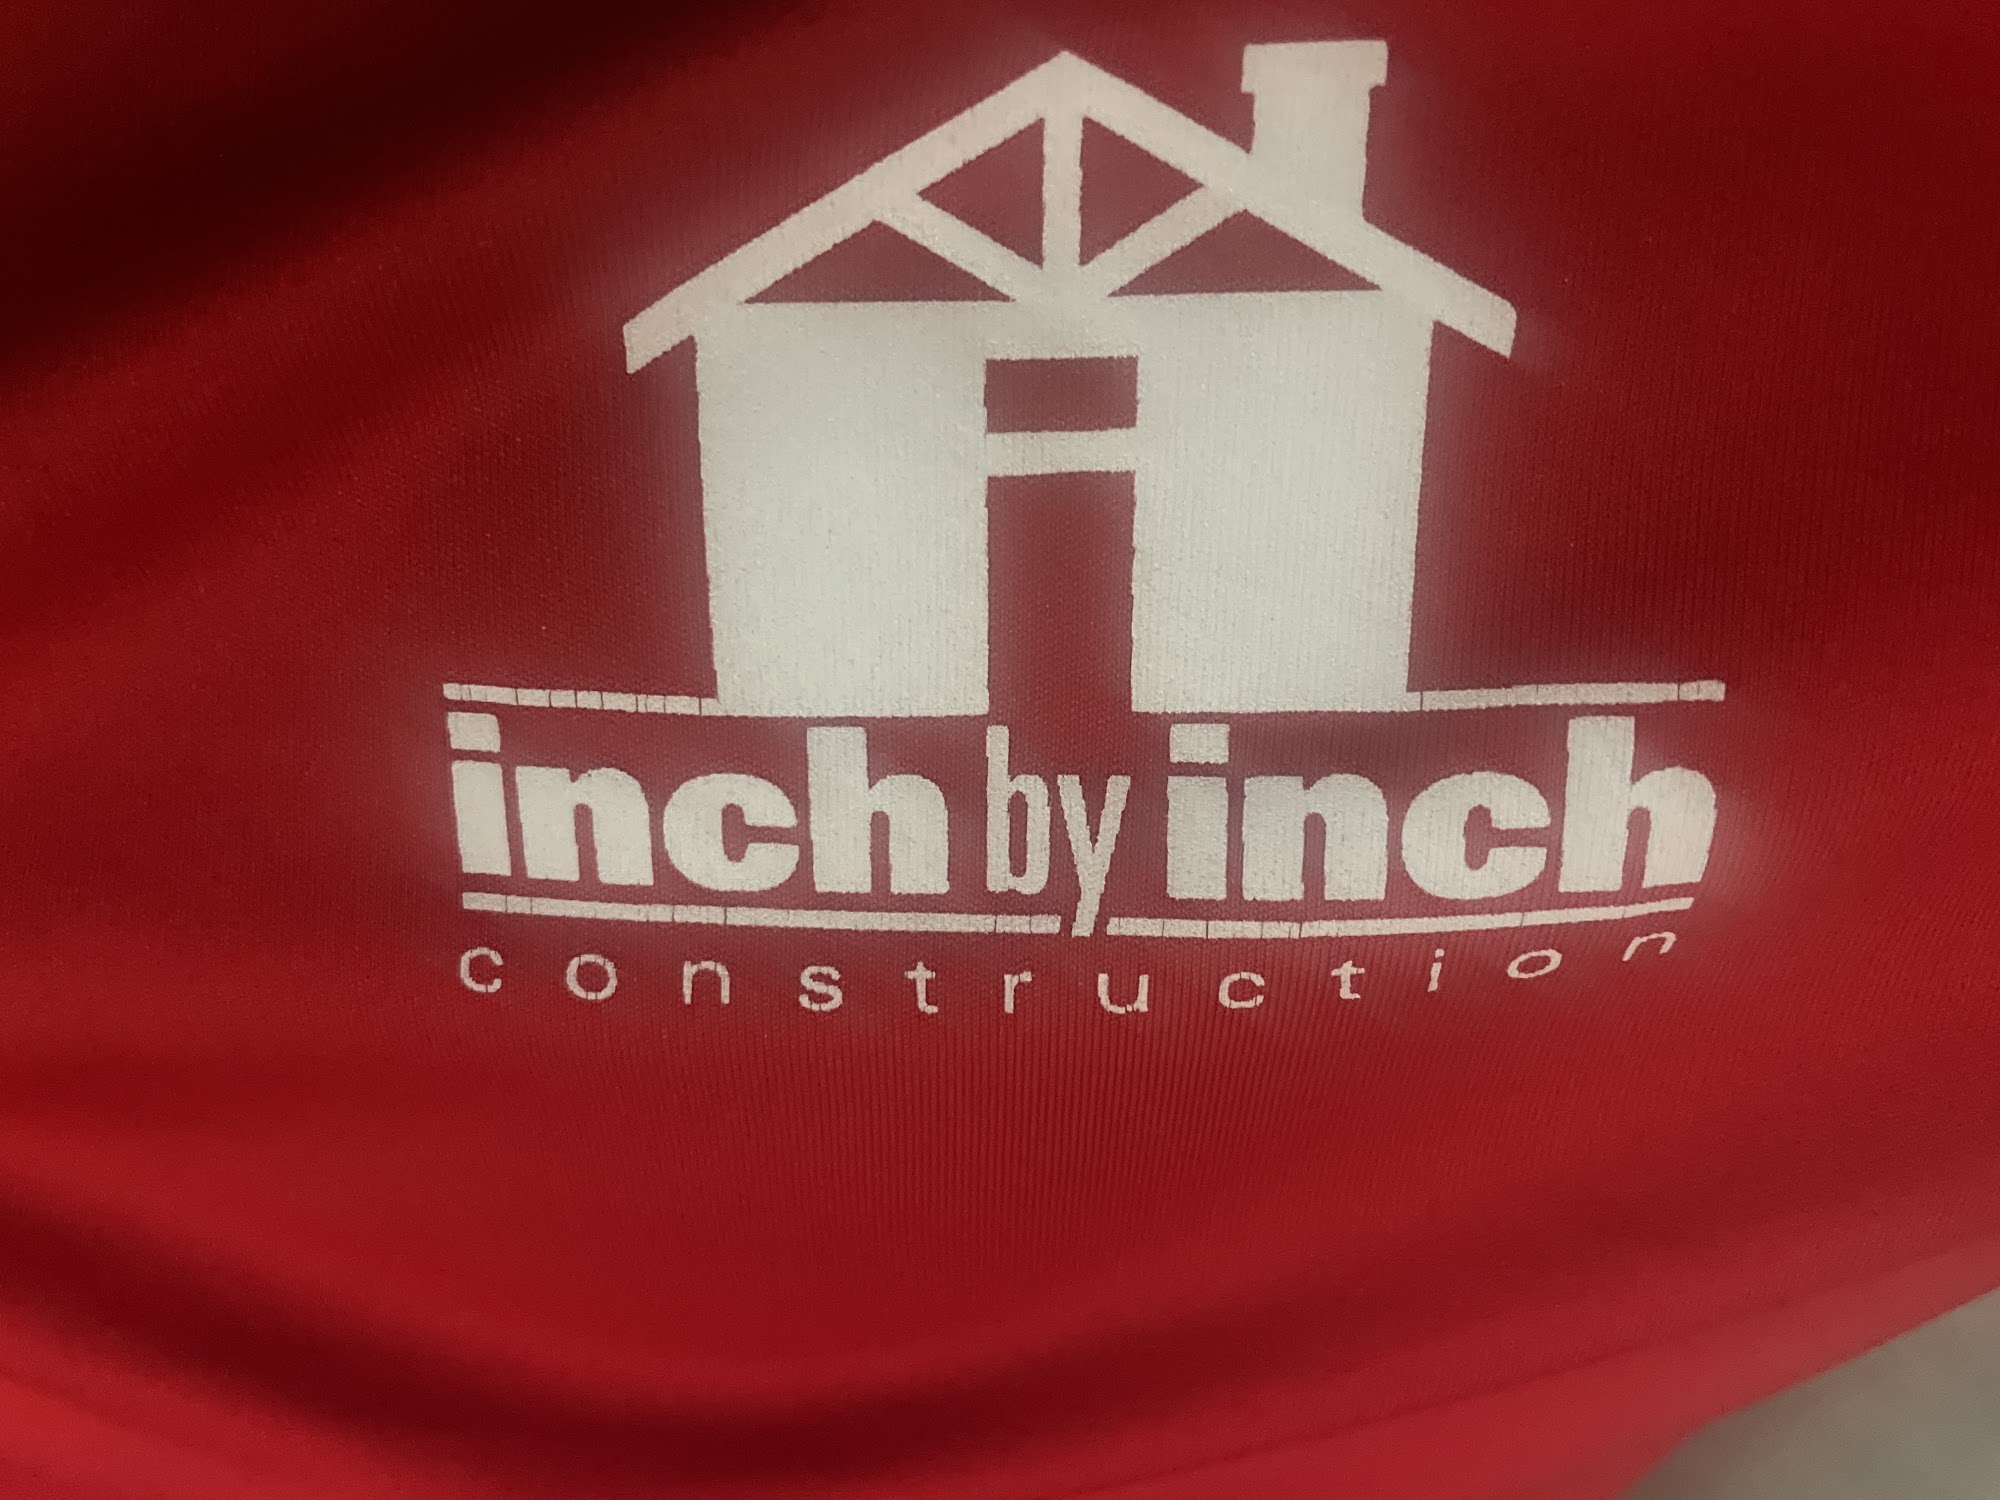 Inch by Inch Construction 2403 South 5th Avenue, Lebanon Pennsylvania 17042